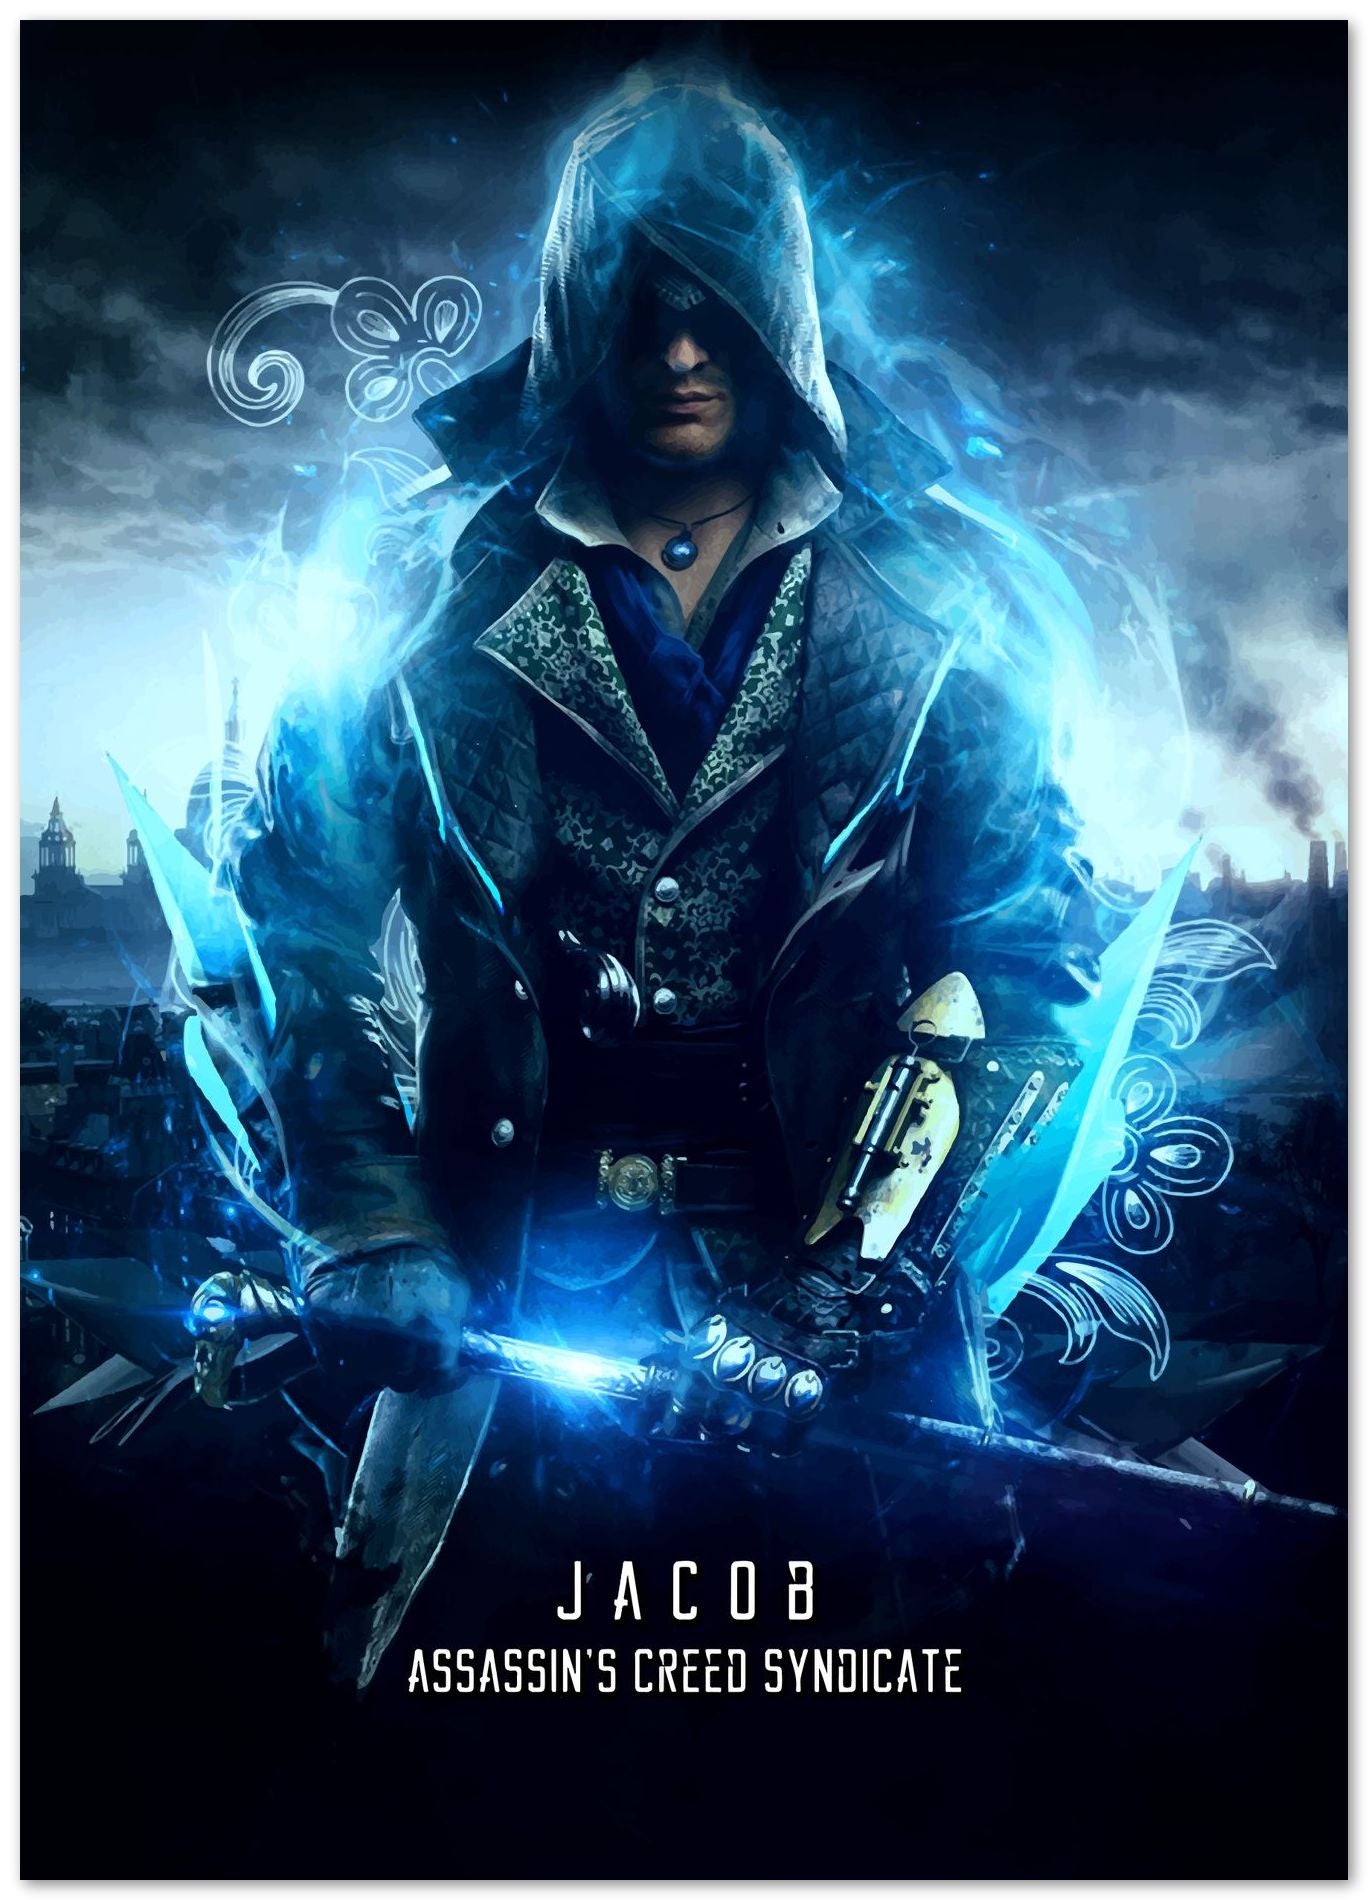 Assassin's Creed syndicate jacob leader - @SyanArt